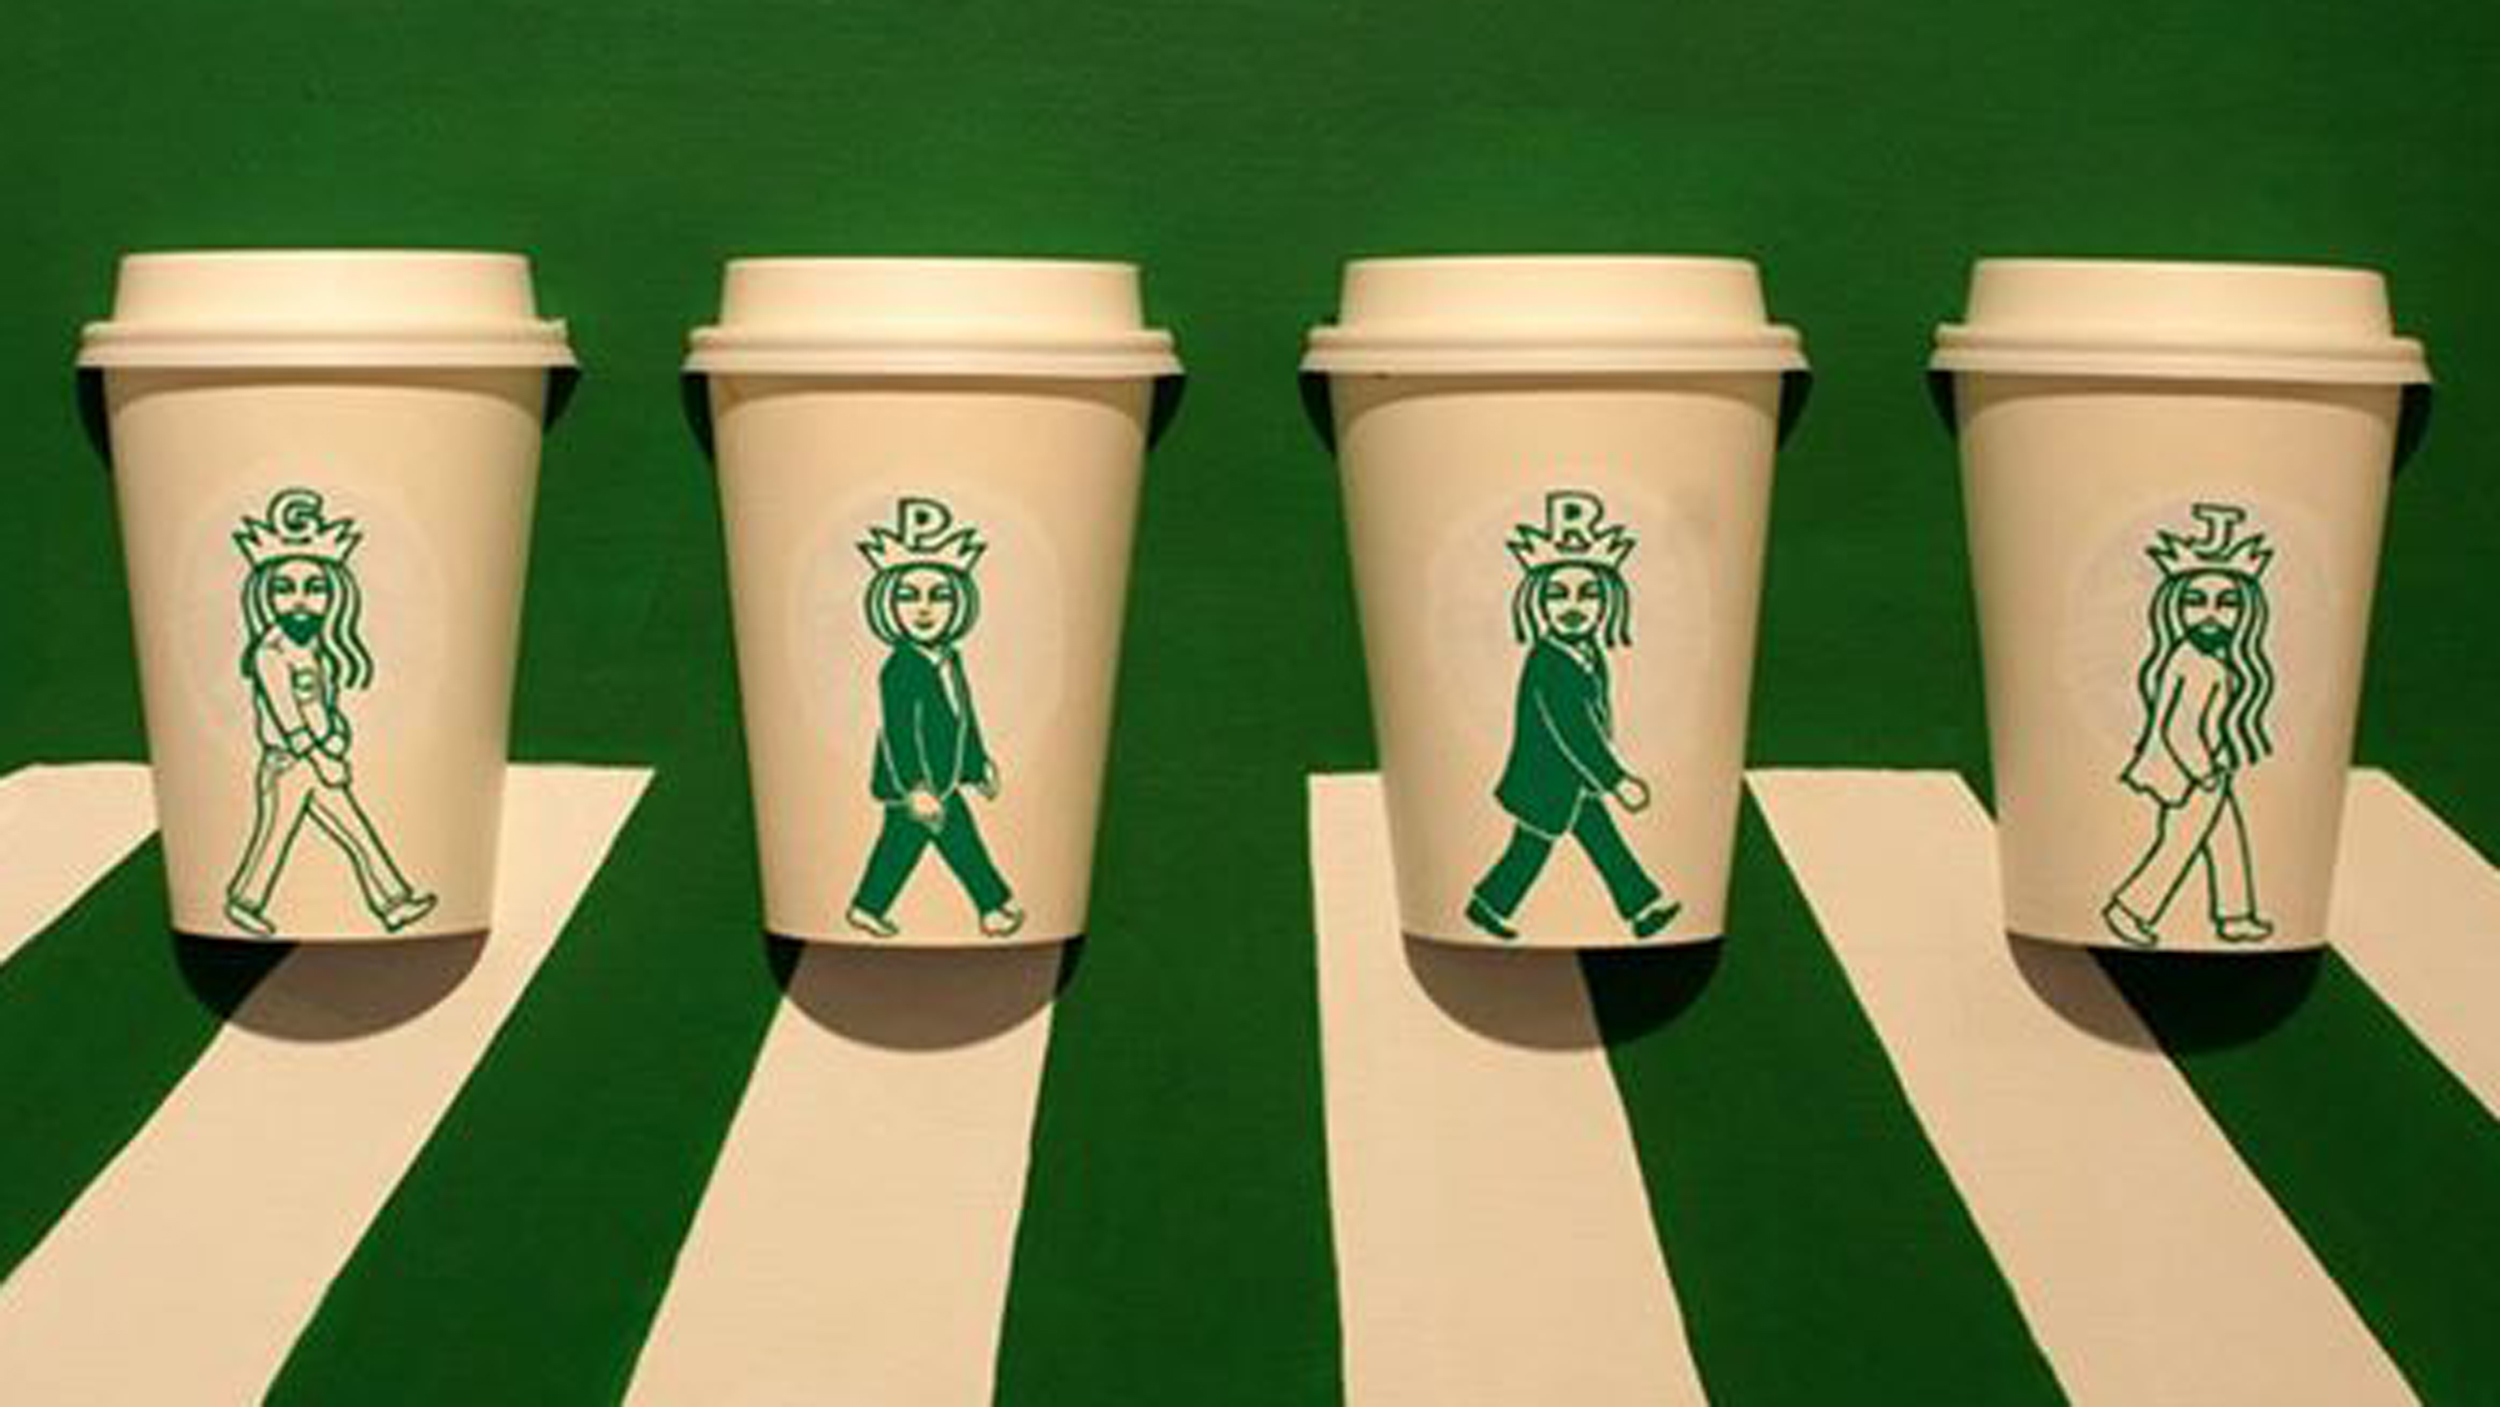 Artist turns Starbucks cups into works of art - TODAY.com